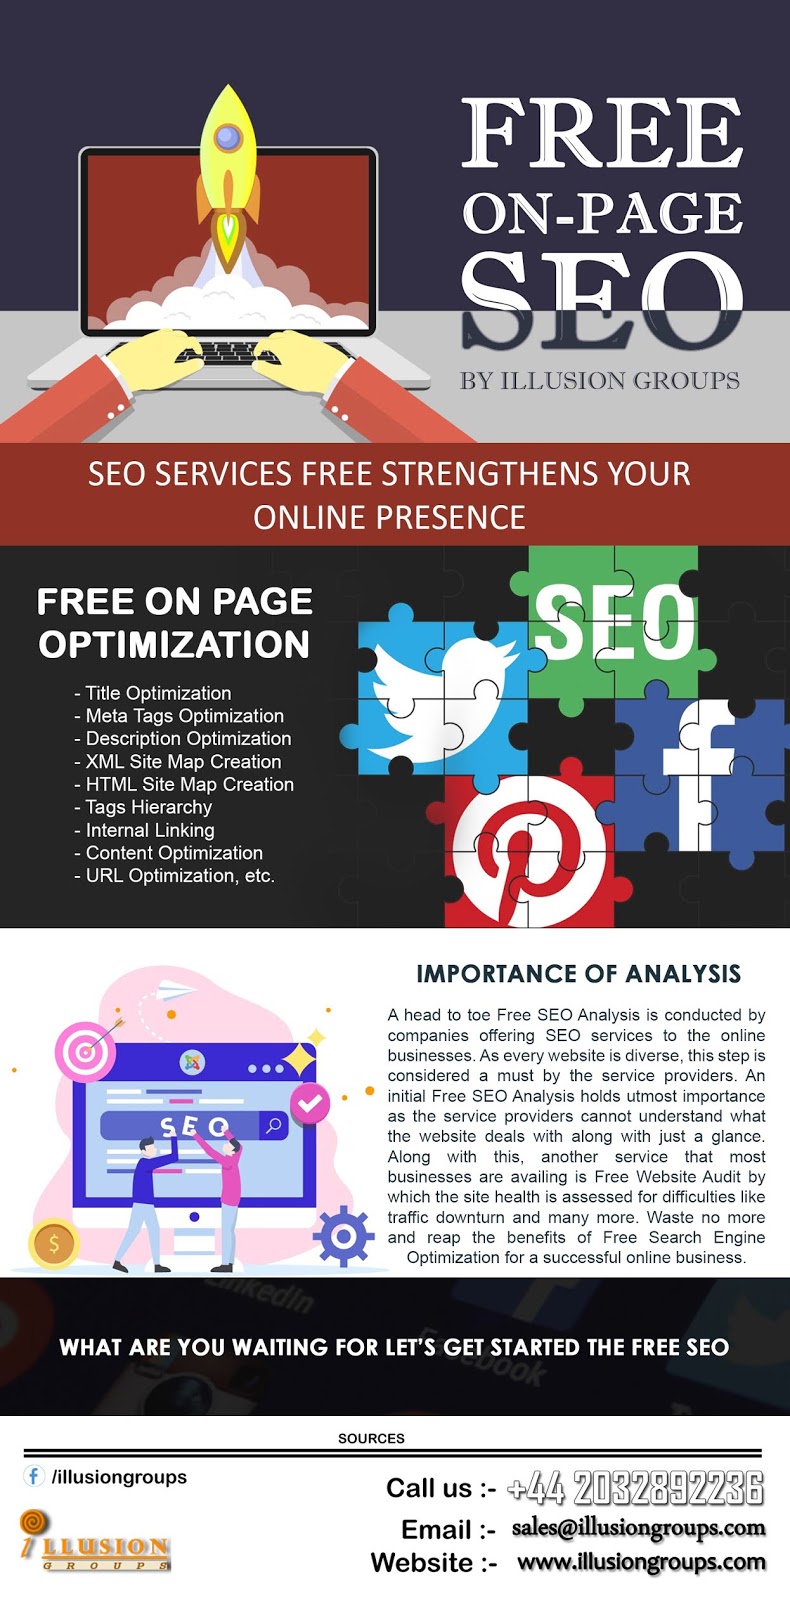 Top Rated Seo Company Best Digital Marketing Seo Company In Us Mify Top  Google Ppc Campaign In Usa Best Seo Smo Company Mify - Buy Mify  Professional Seo Services Internet Marketing Company